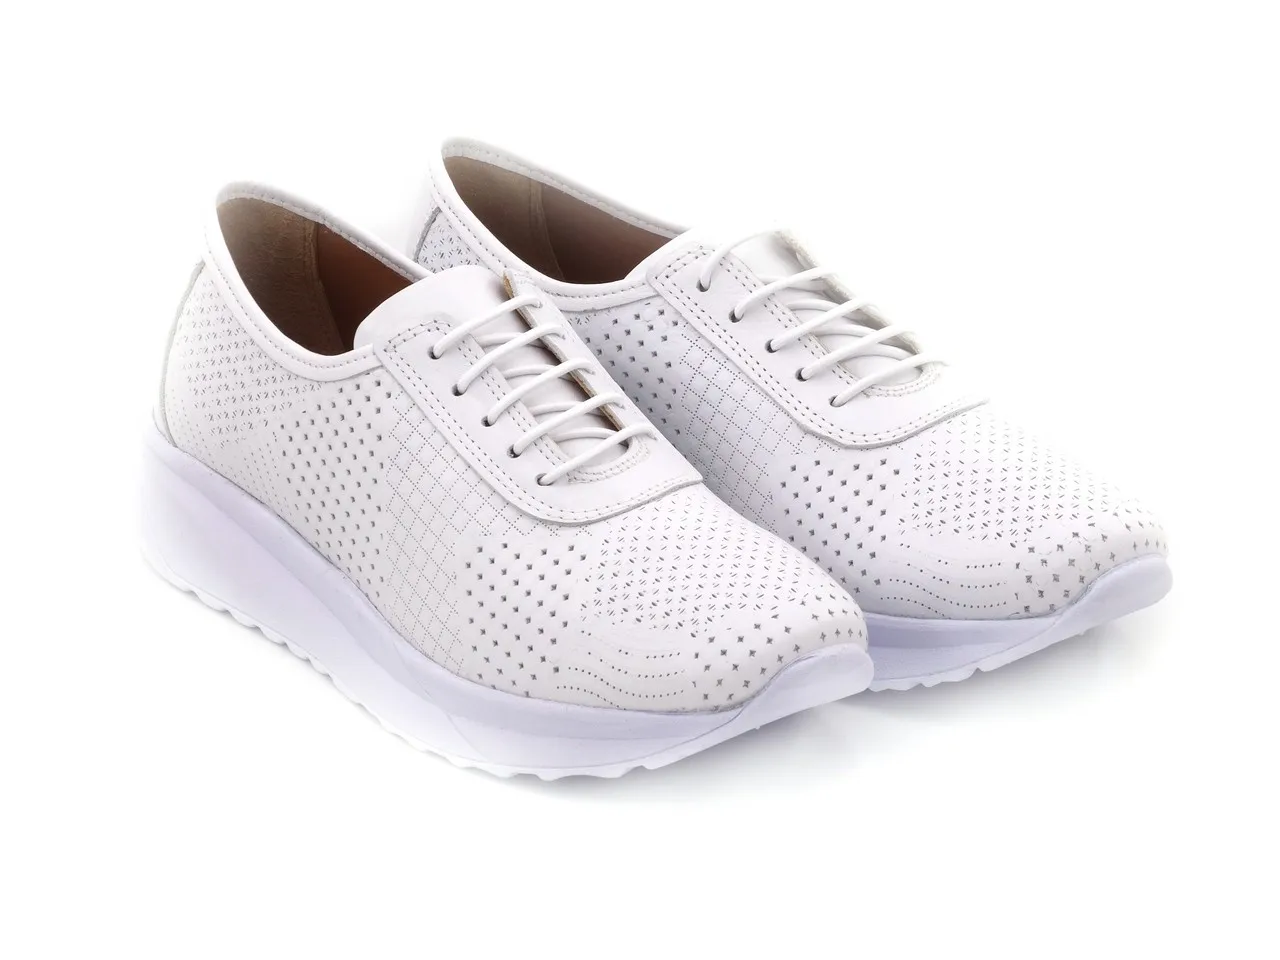 Women's Sneaker 2022 Fashion Genuine leather Sports Shoes High Quality Ultra Light Made in Turkey - Step By Step